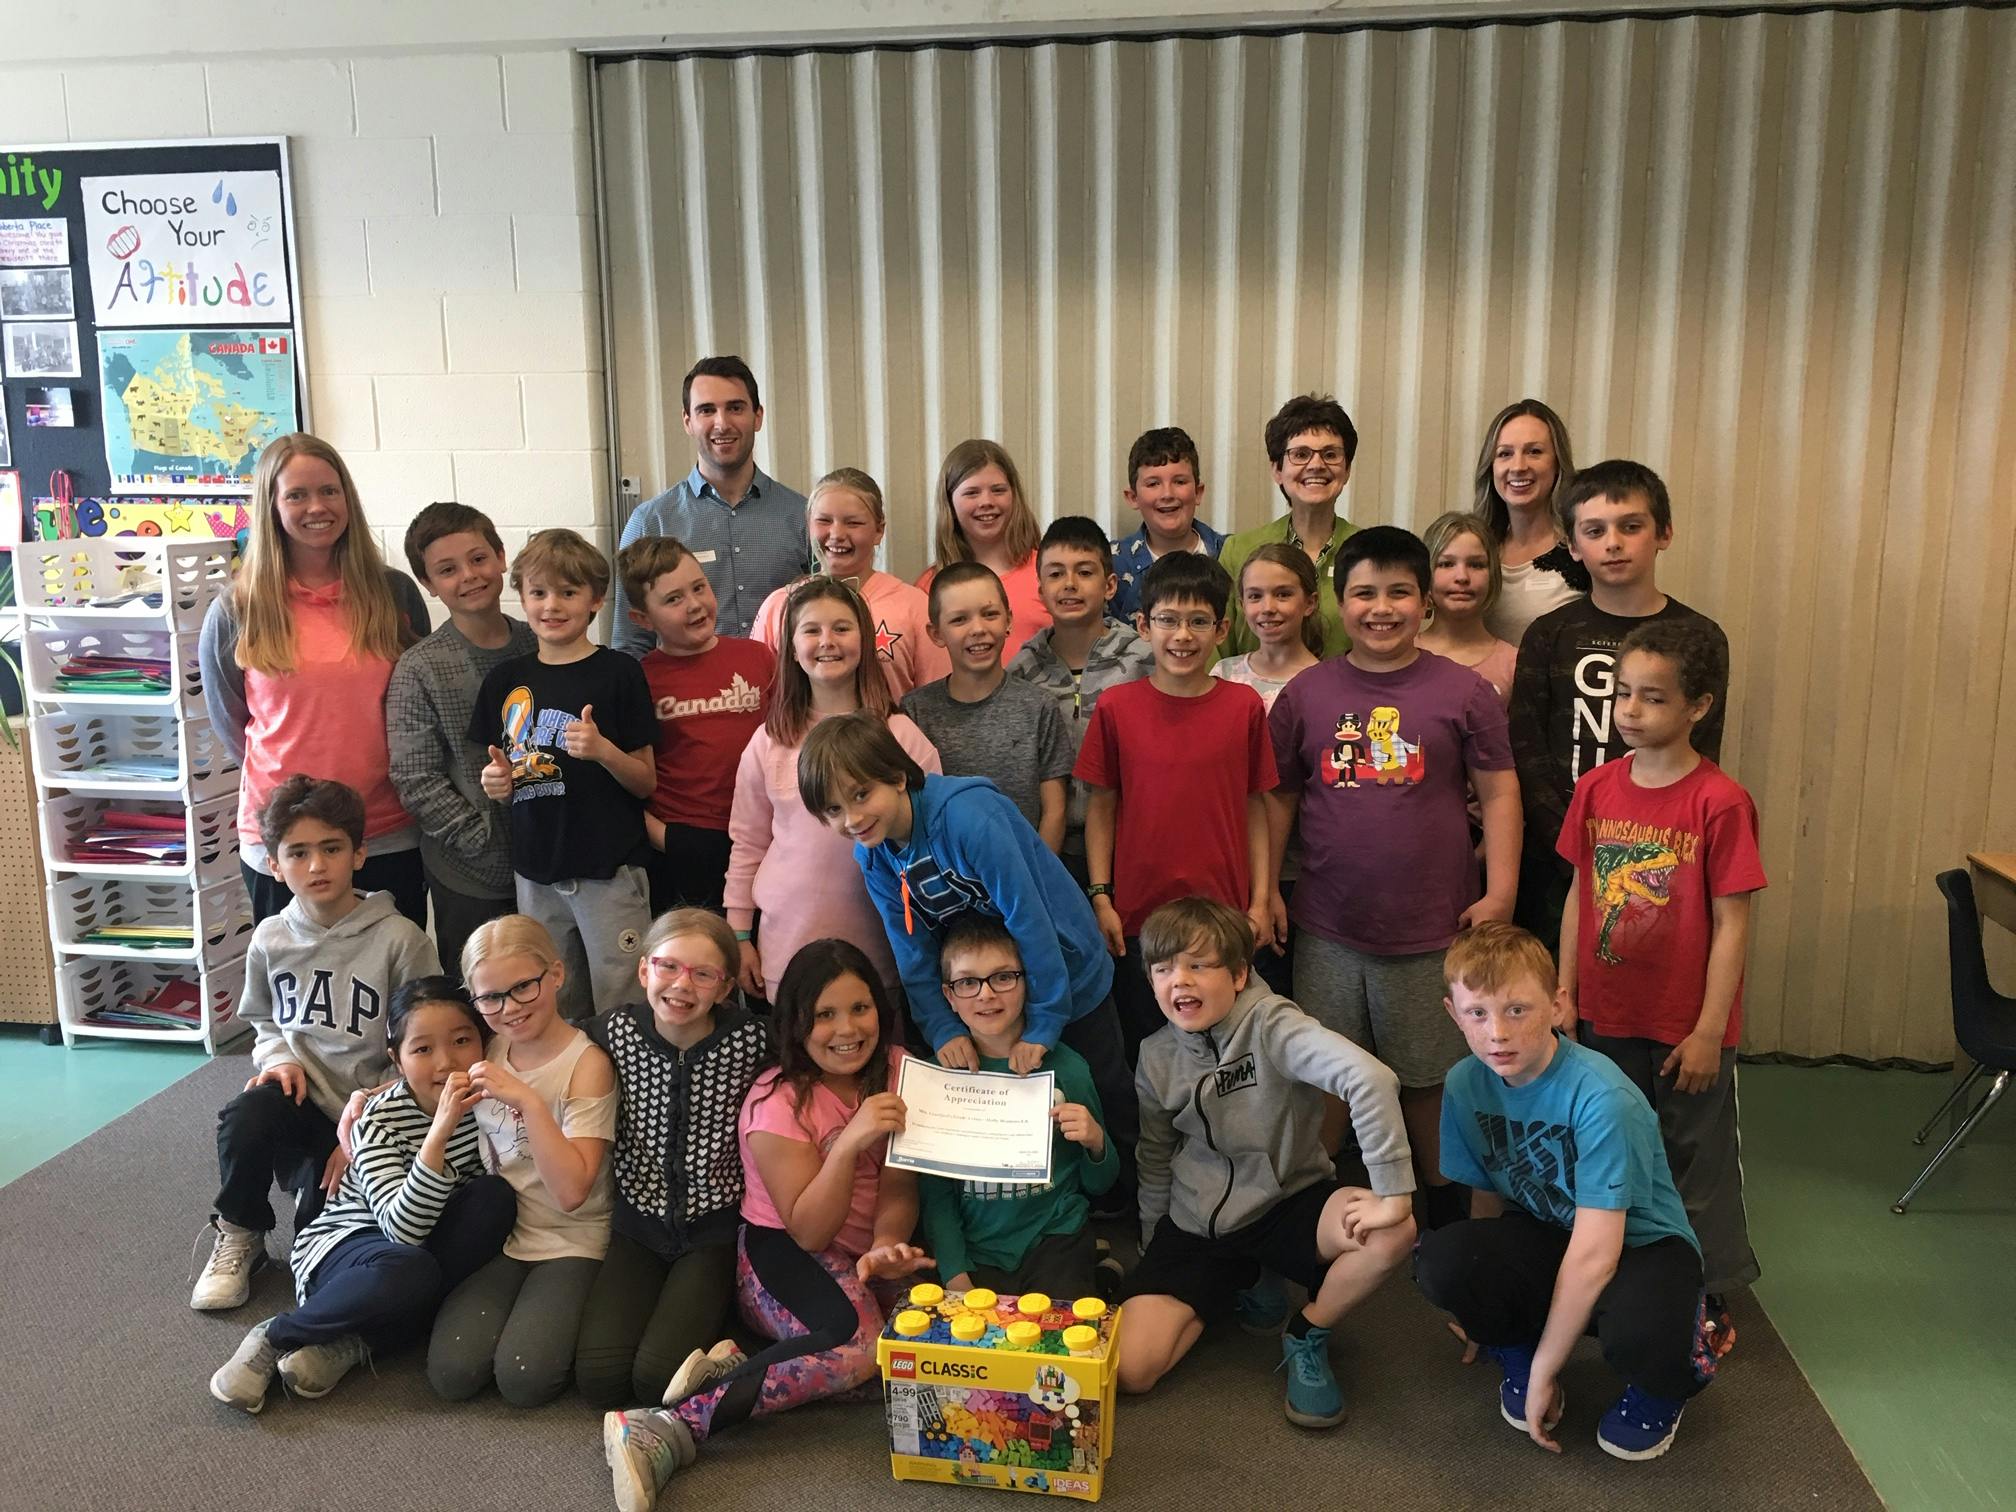 Mrs. Crawford's Grade 4 class at Holly Meadows Elementary School presented with their certificate for providing insightful feedback and their visions for Barre's future. 